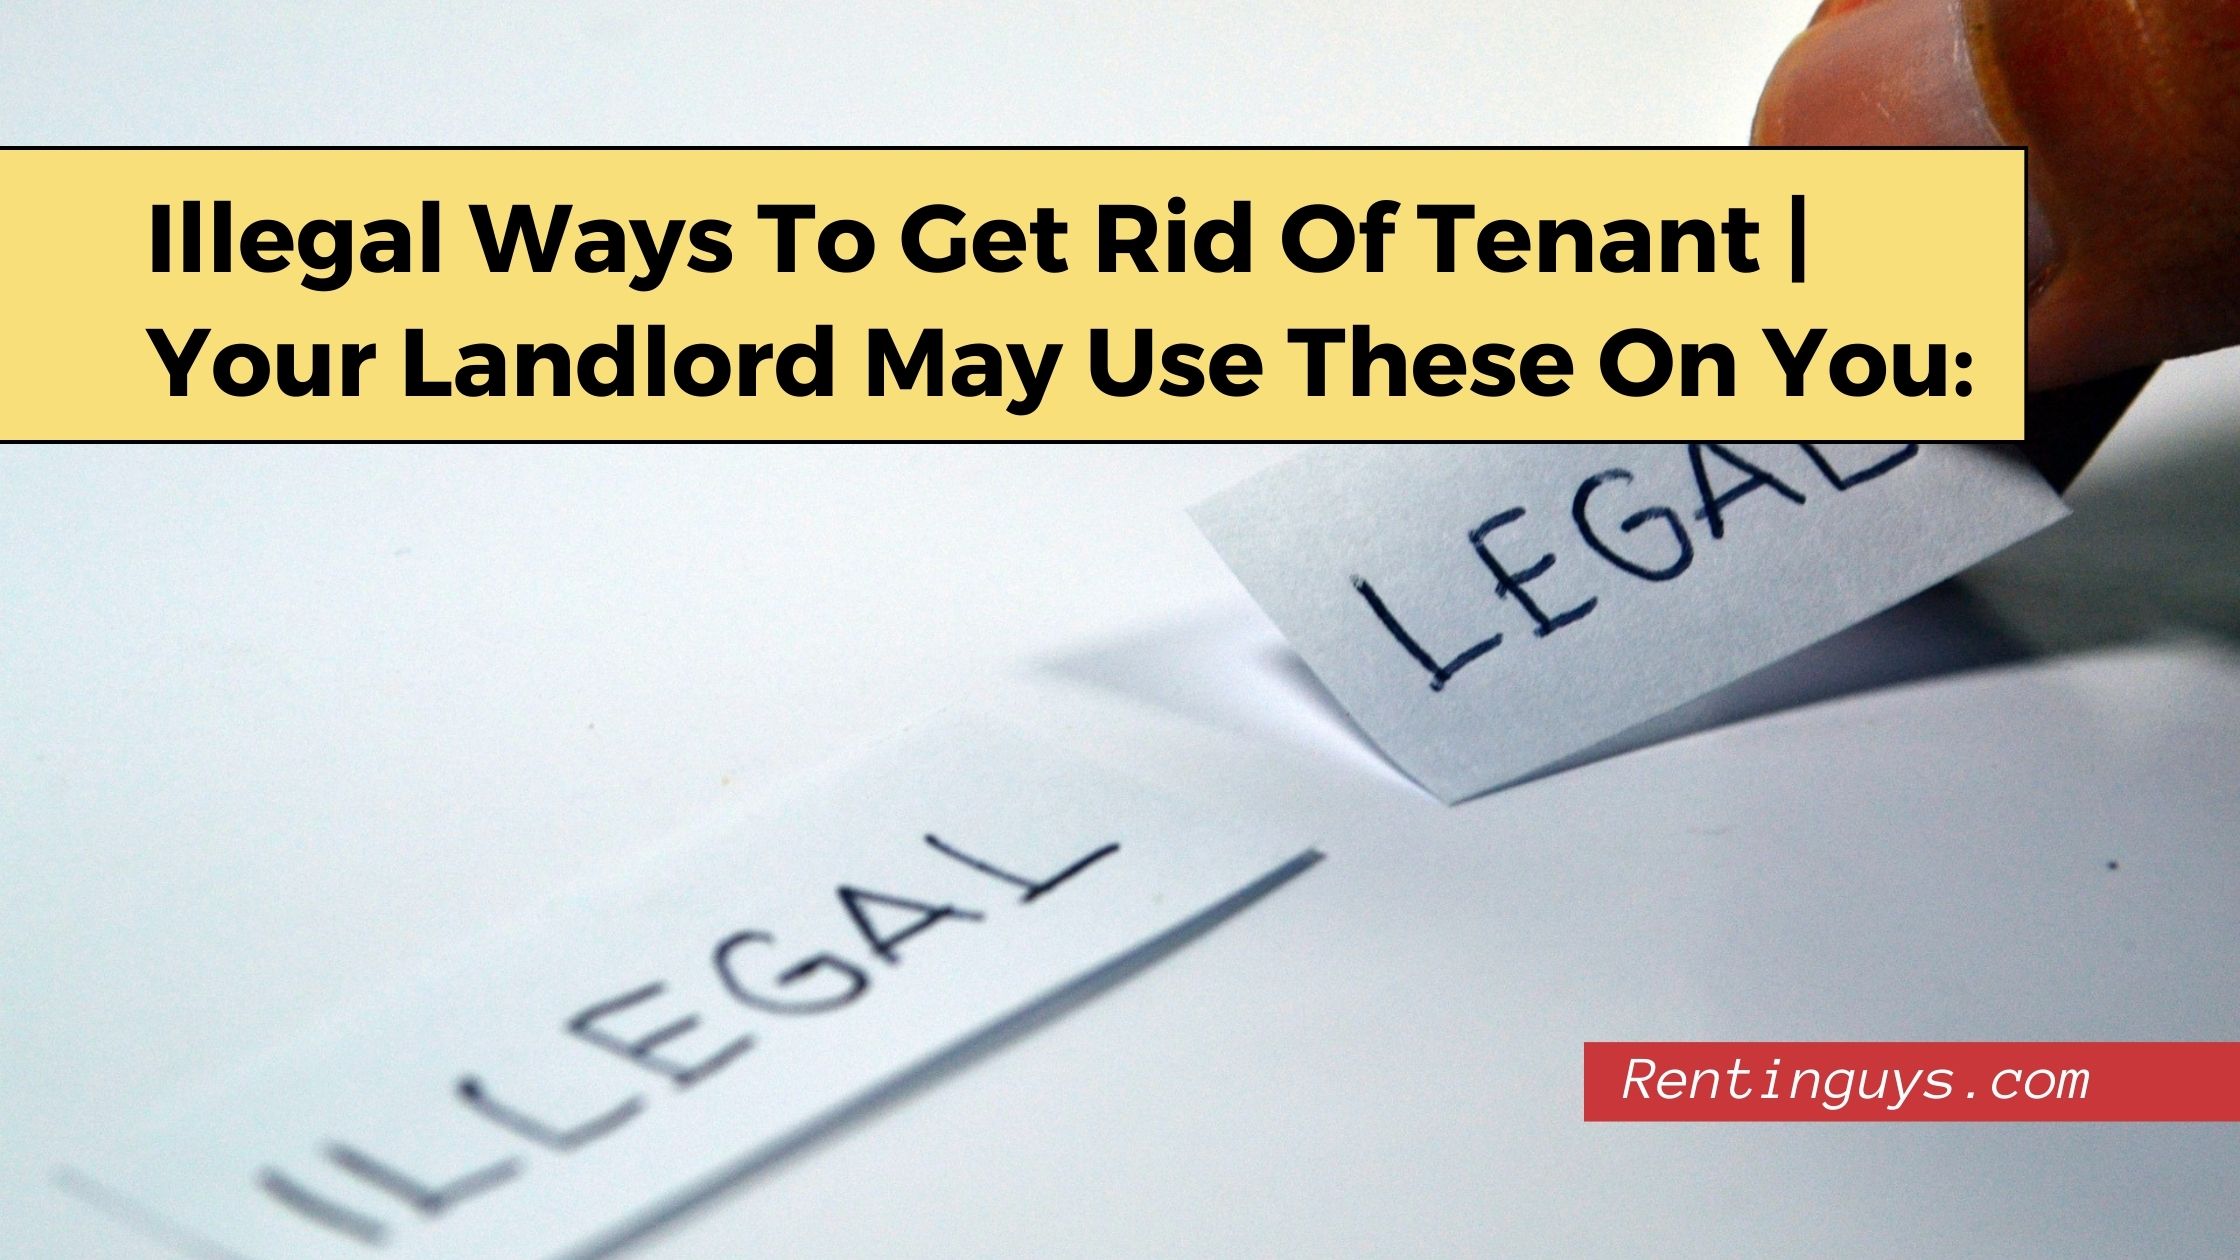 Illegal ways to get rid of tenant